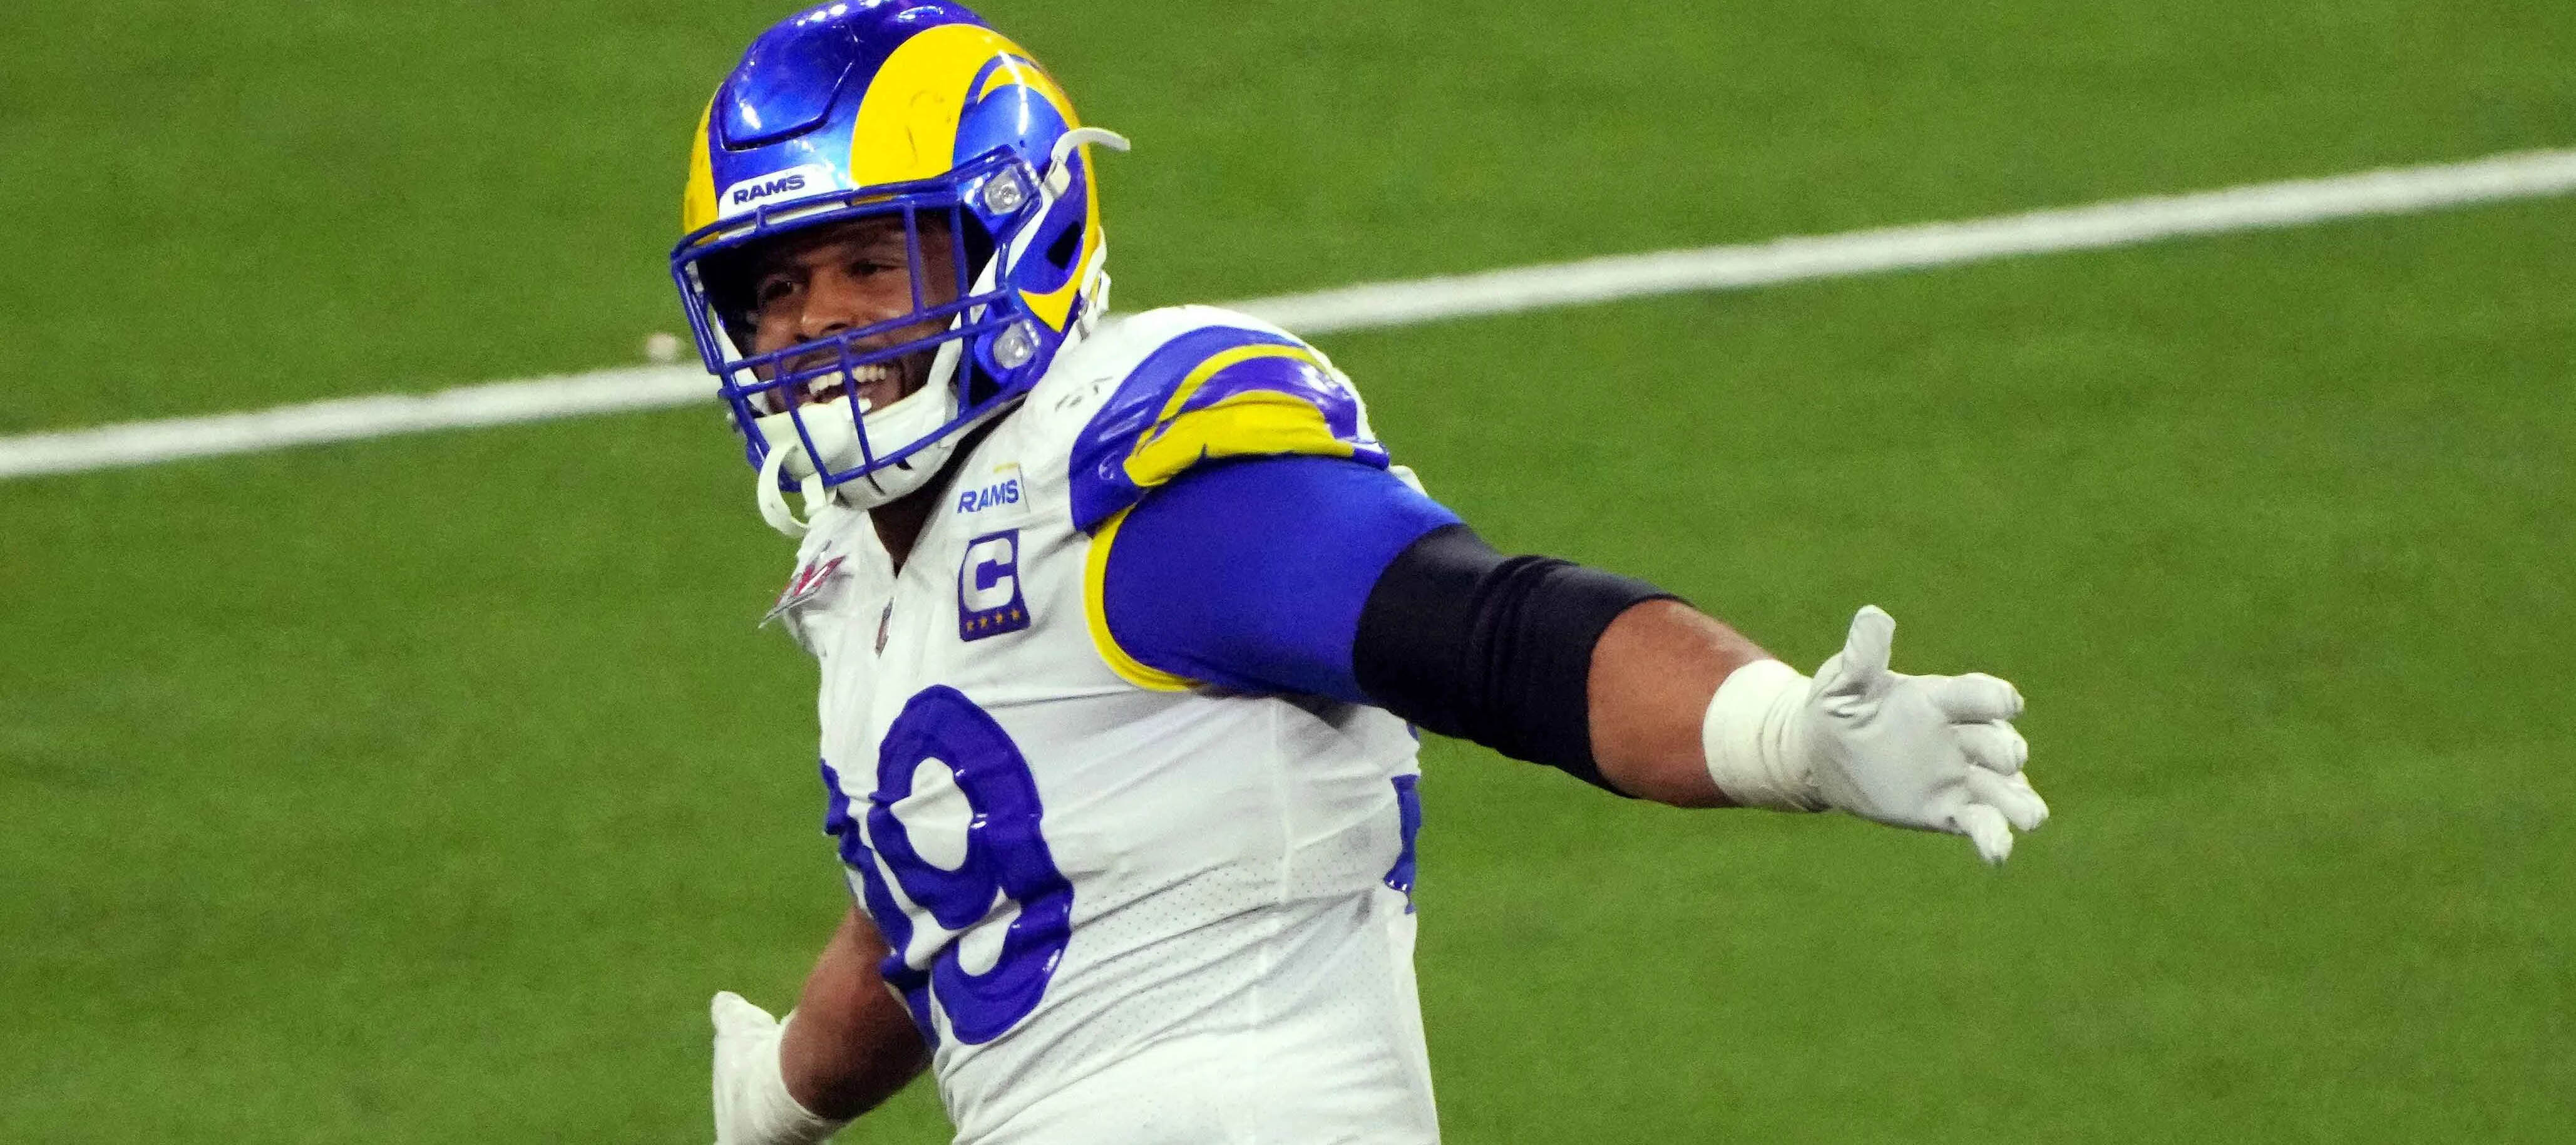 NFL Betting Rumors, Trades & News Aaron Donald Lands a $95M Contract, Metcalf Missing OTAs